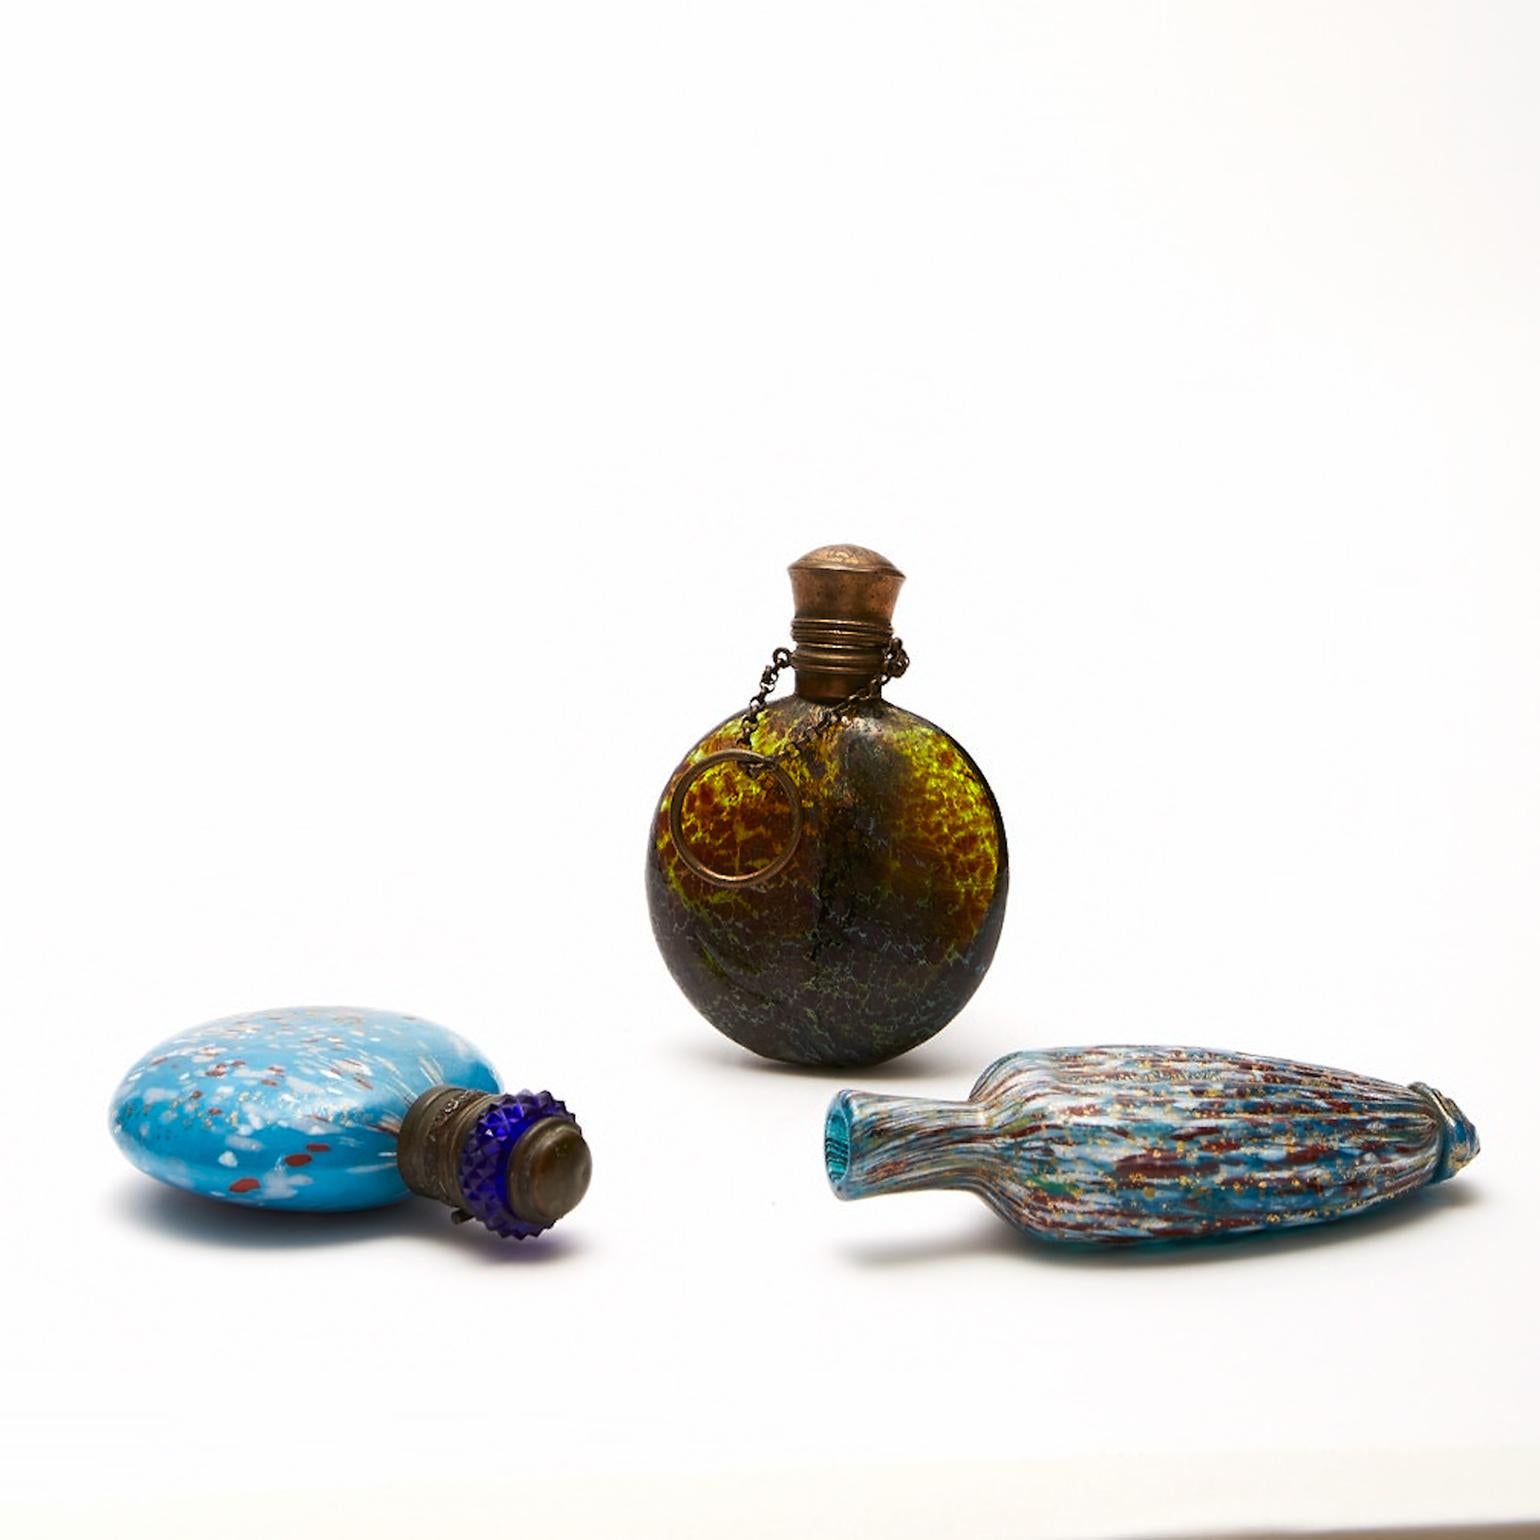 Four Chatelaine Venetian Scent Bottles circa 1870-1890 blown glass made by the late 19th Century glass masters of Murano.
The three smallest are internally decorated with gold powders and two of them have gilt metal mounts. One of the mount is